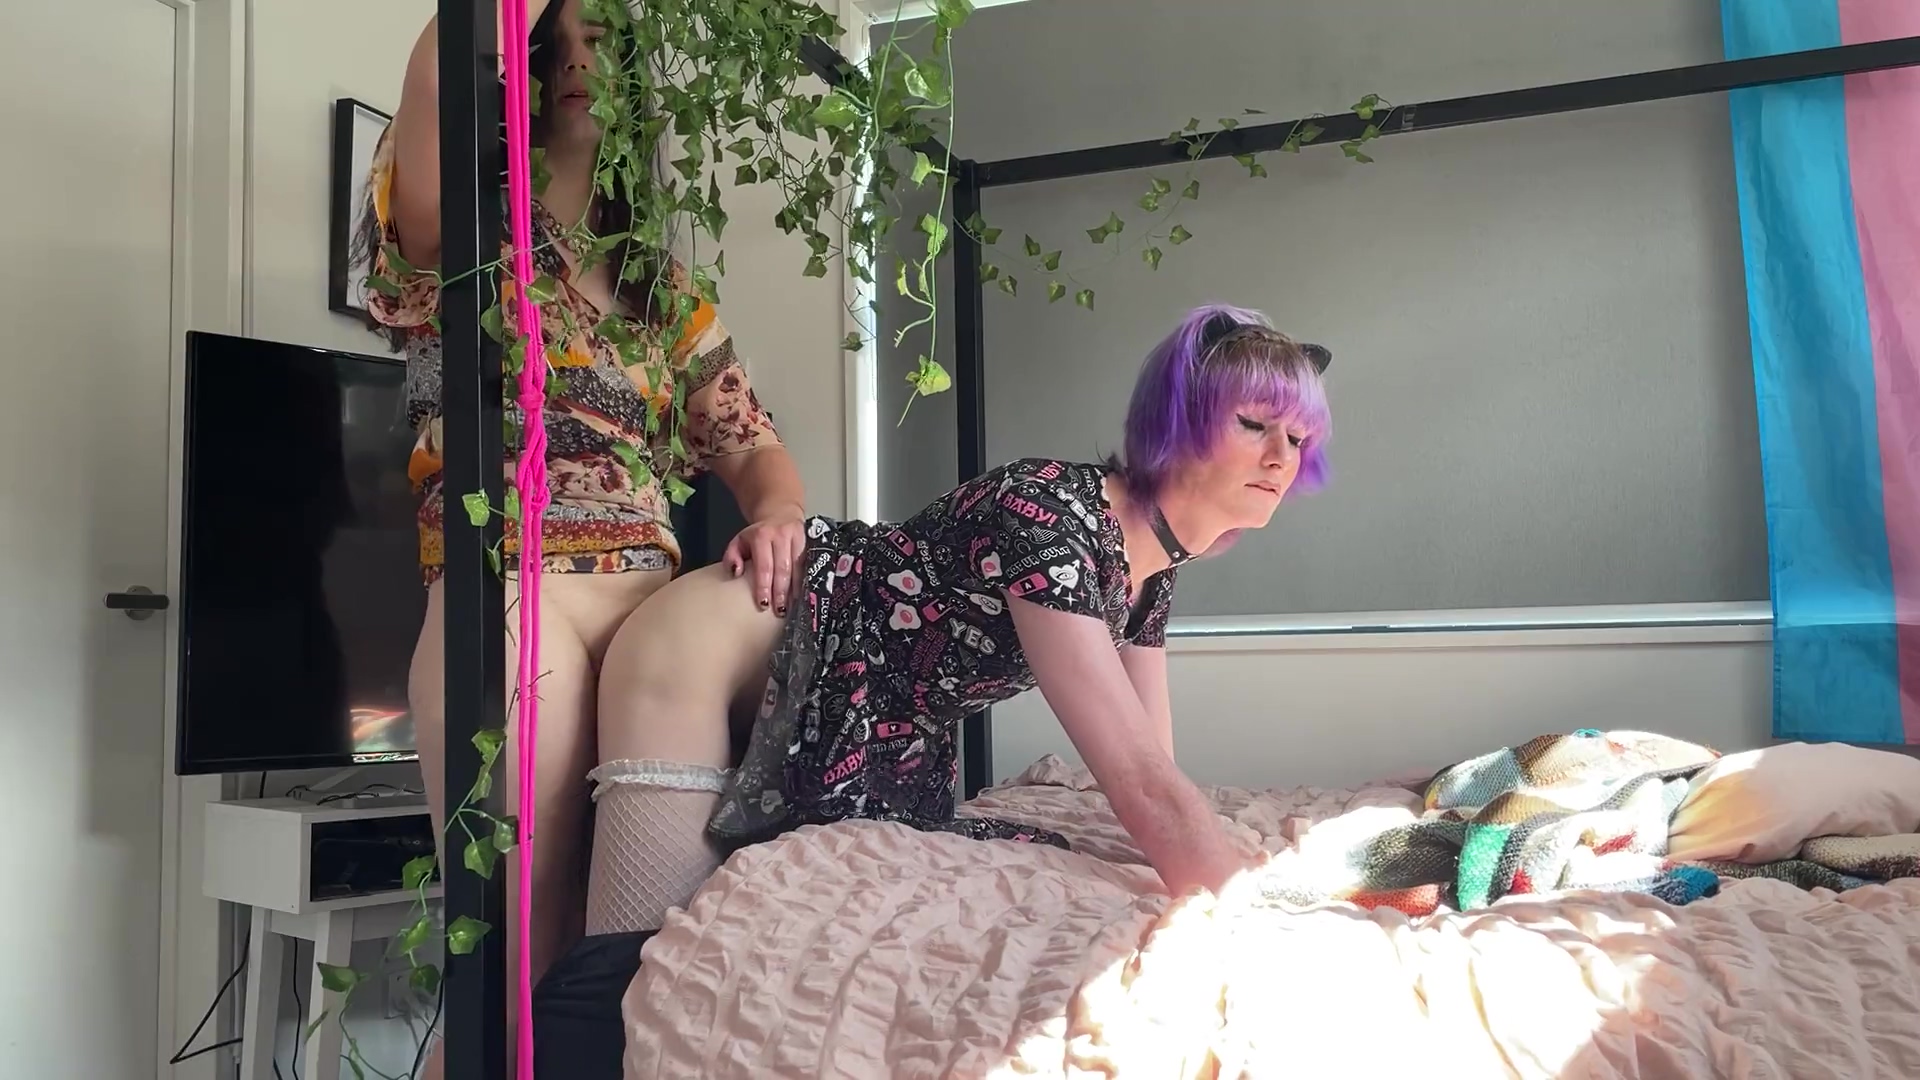 New Zealand Amateur Trans Lesbian Anal Ass Fucking Cassie Moans Shemale Porn Video - Shemale and Tranny Porn Tube